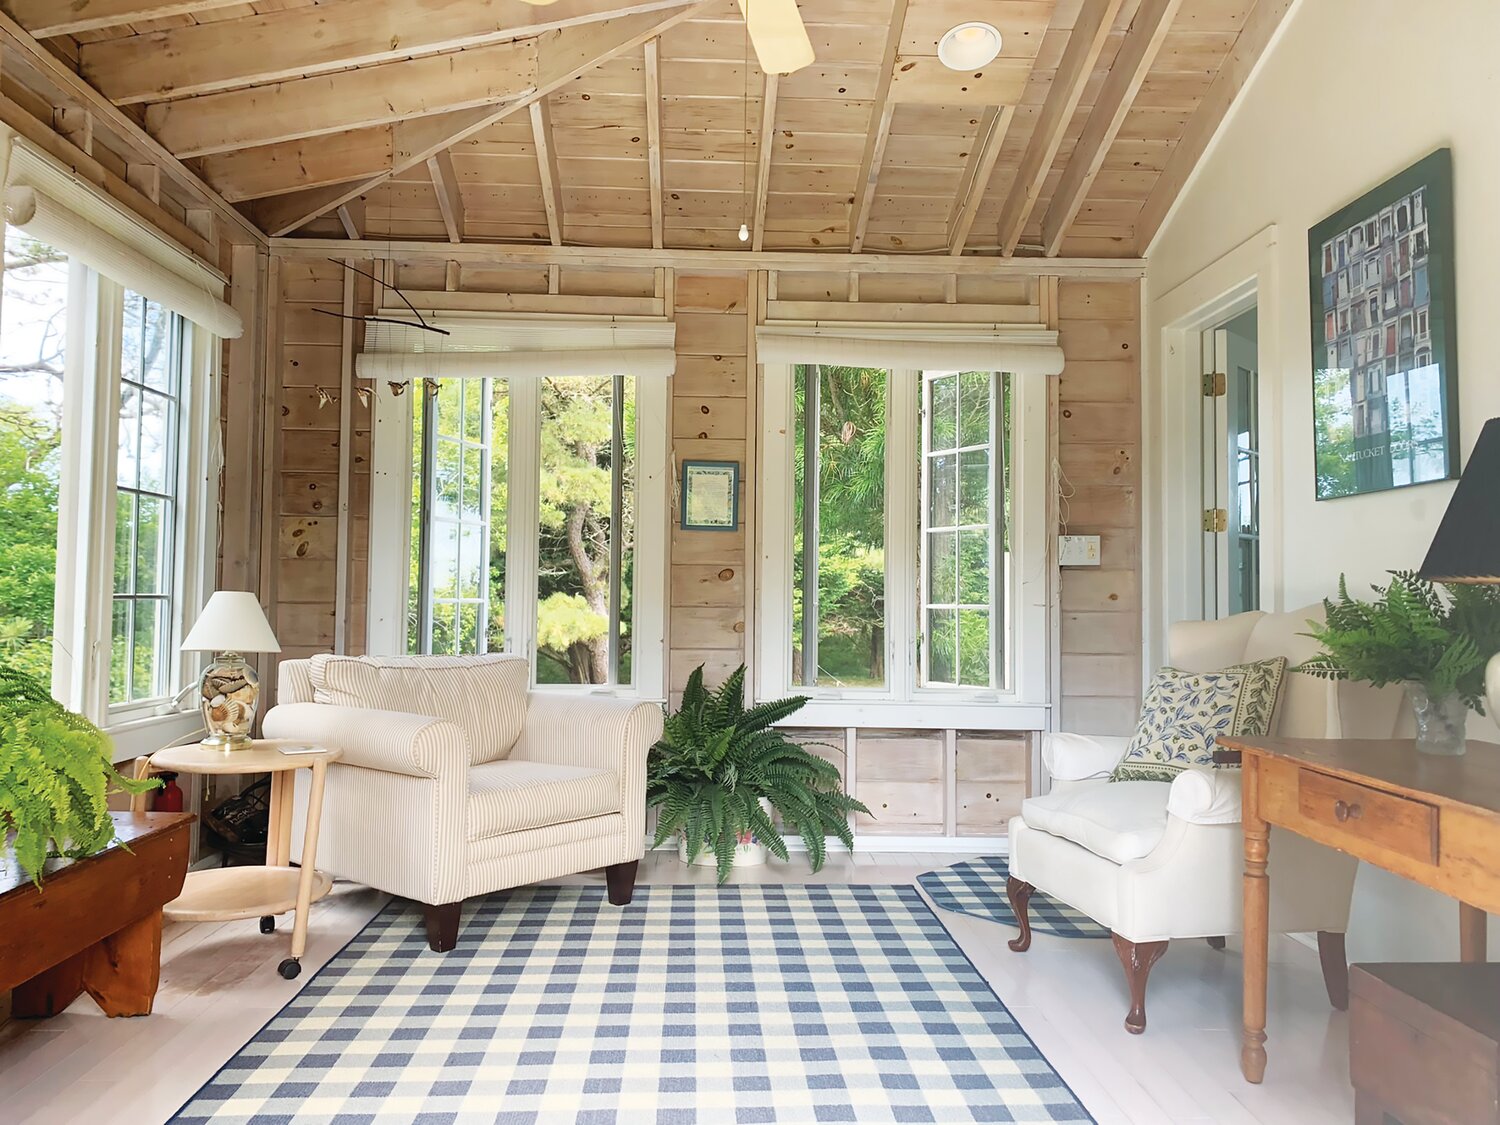 The cottage sunroom has exposed beams, a ceiling fan and is the ideal spot for relaxing three seasons of the year.